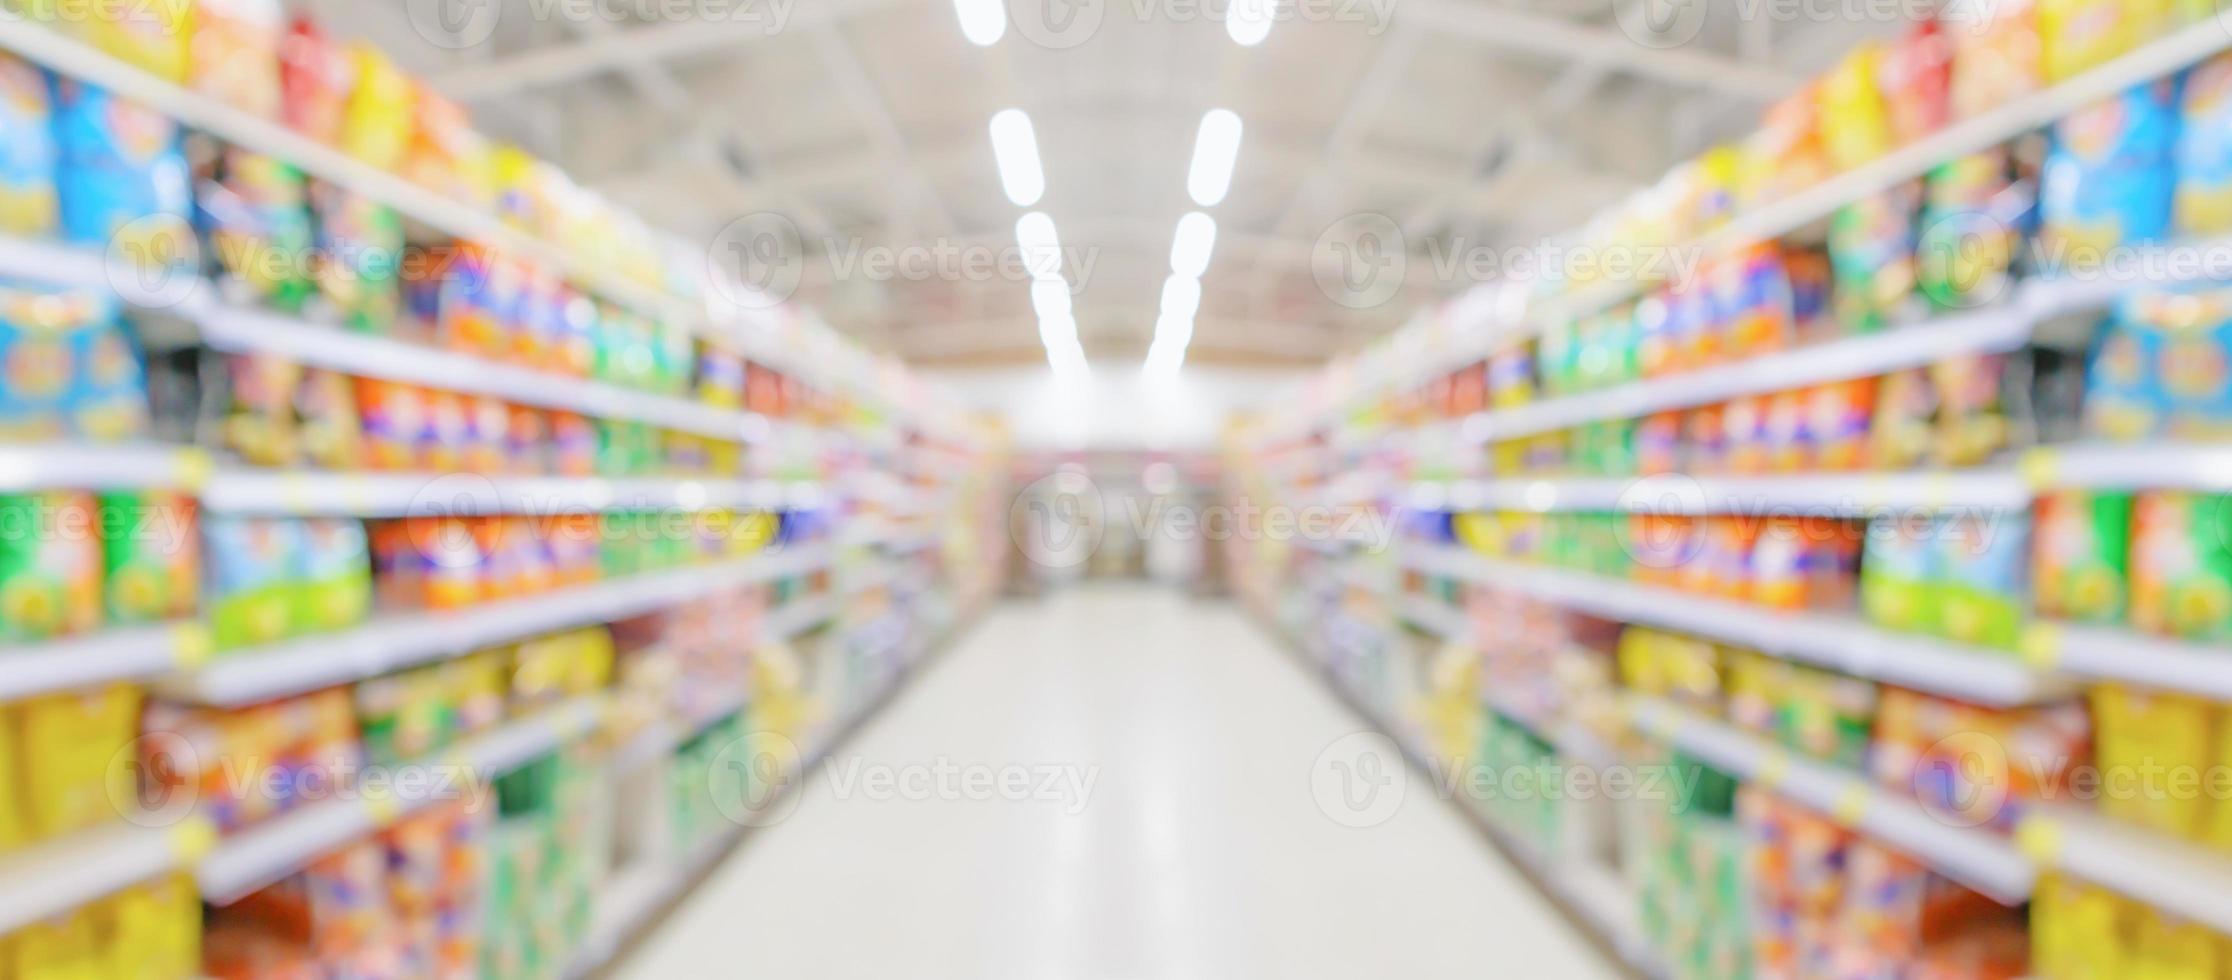 supermarket store aisle interior abstract blurred background photo